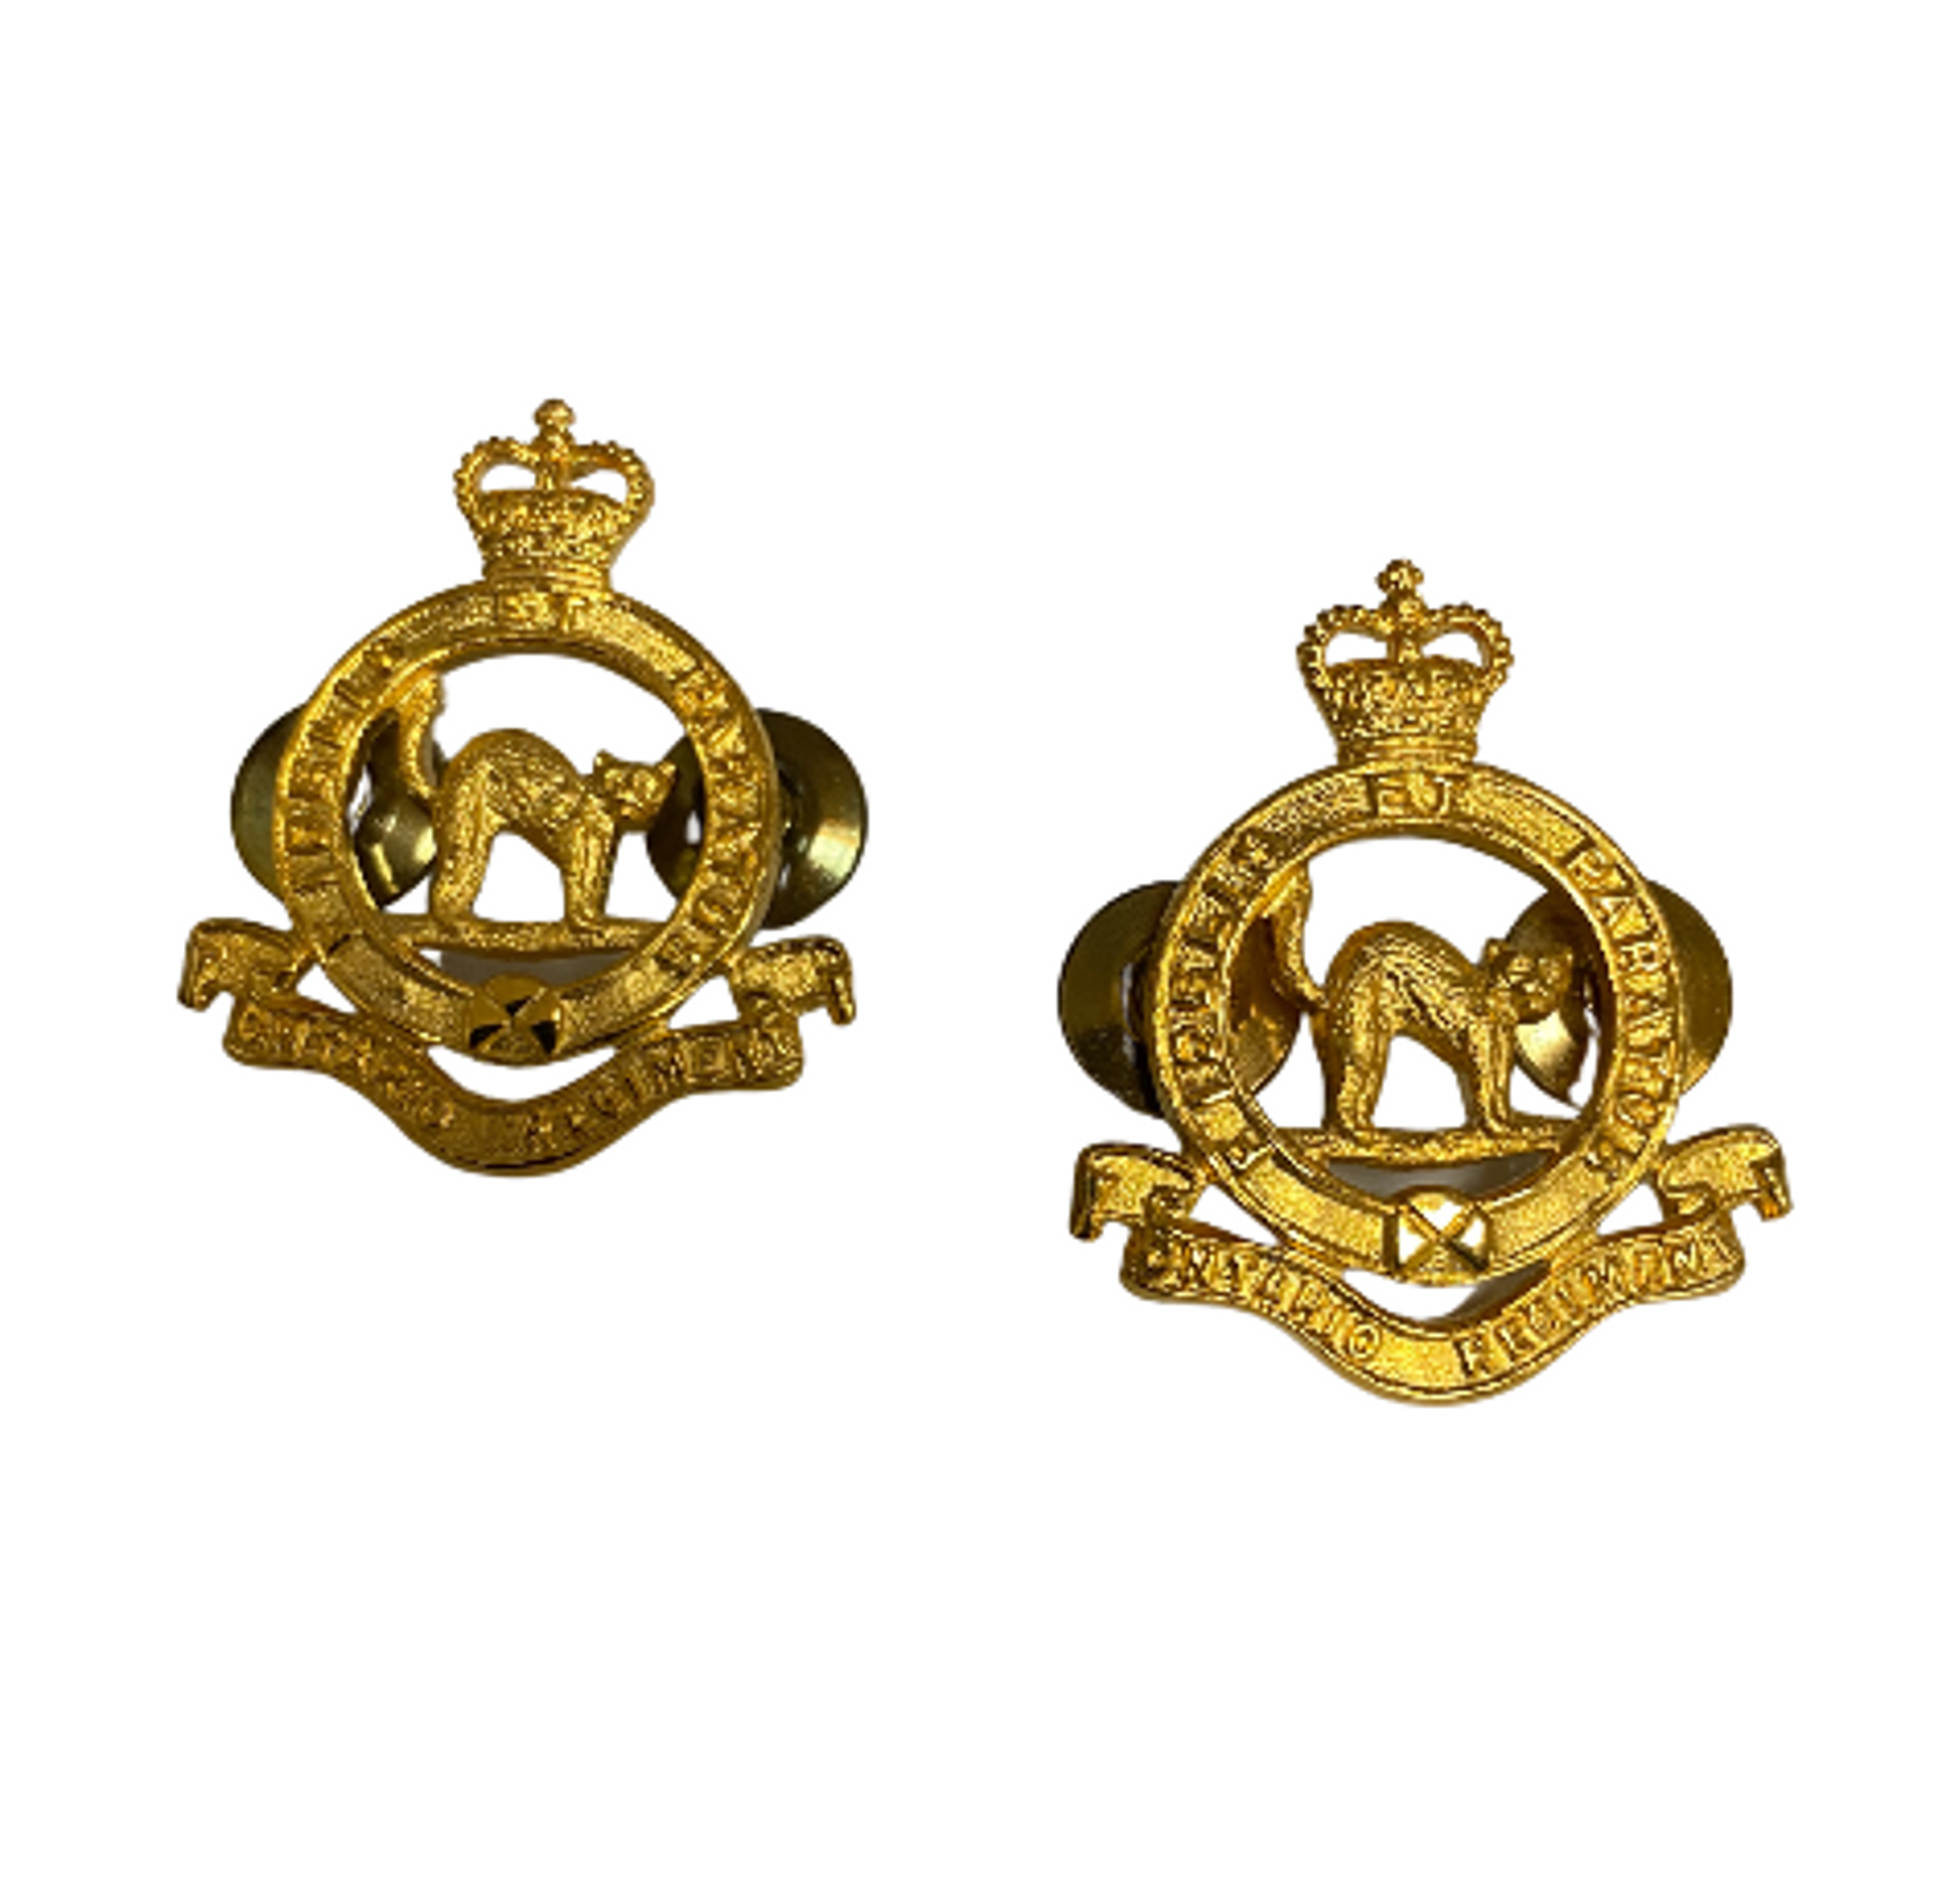 Canadian Armed Forces - The ONTARIO Regiment Collar Pins (Pair)